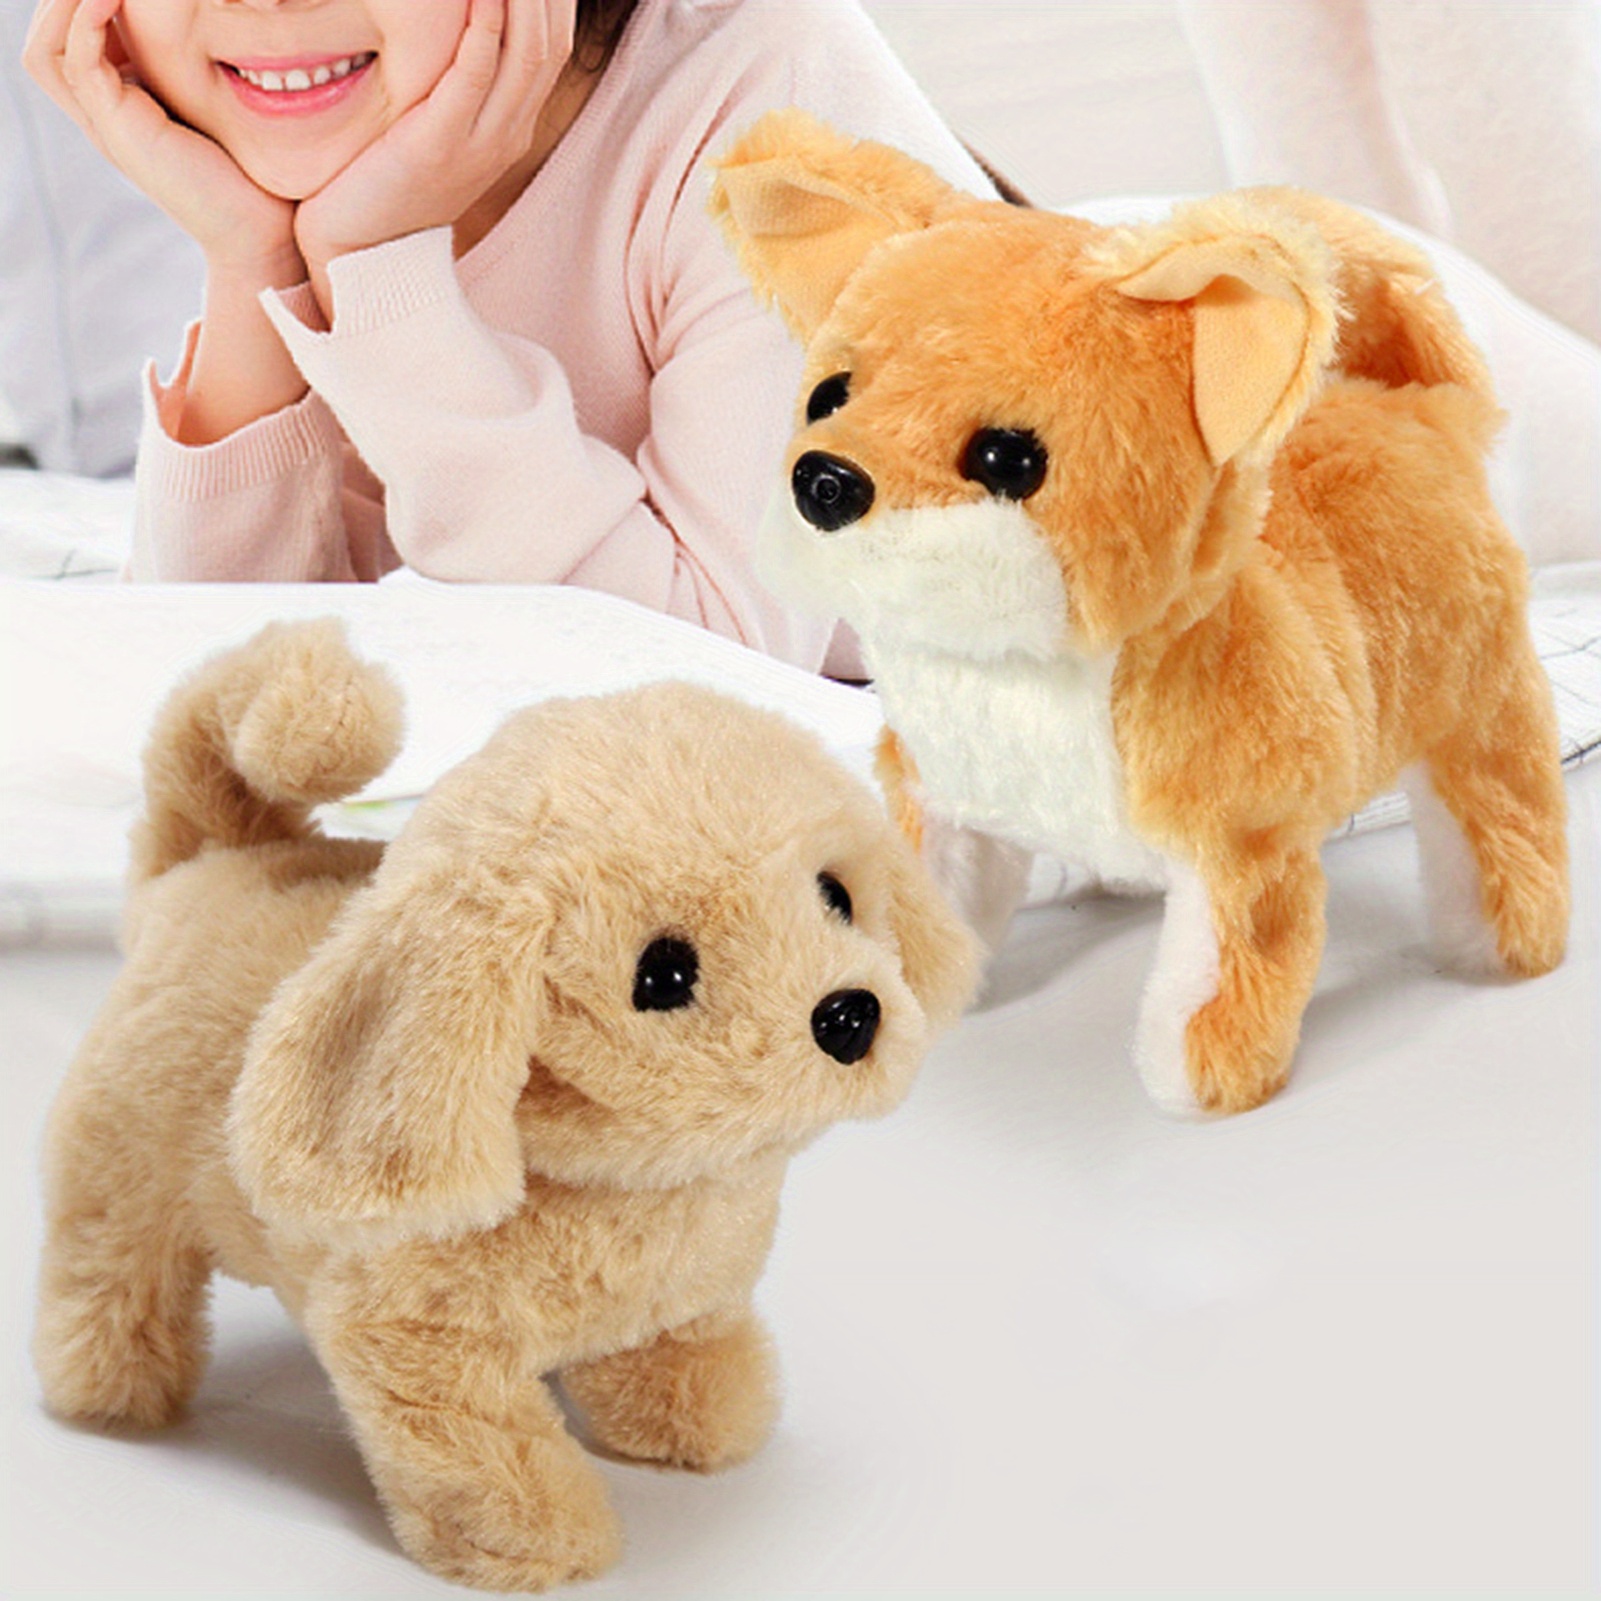 

A Cute And Versatile Electronic Pet Robot Puppy Toy, With Exquisite Craftsmanship, Measuring 7.09*5.12*5.91 Inches, Is A Perfect Gift For The Holidays.